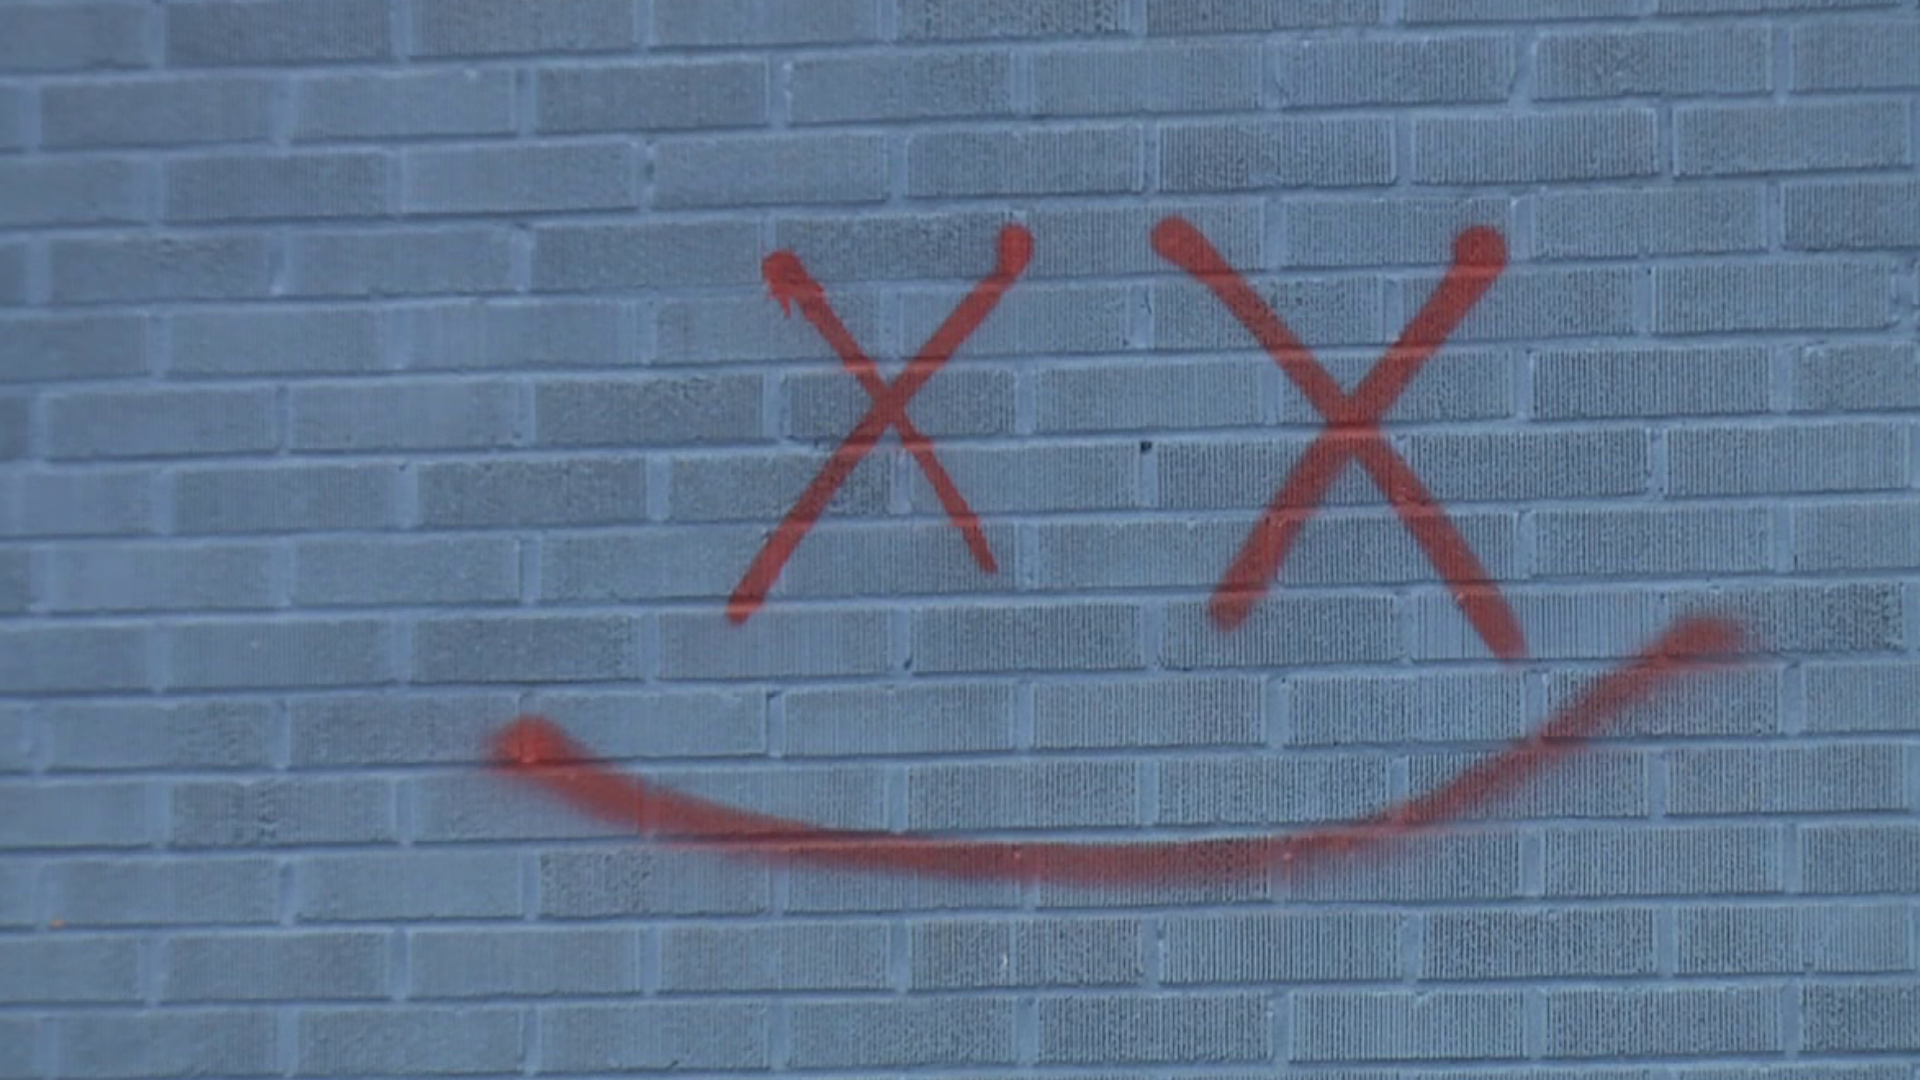 Graffiti faces have been spray-painted all over one neighborhood in Luzerne County.